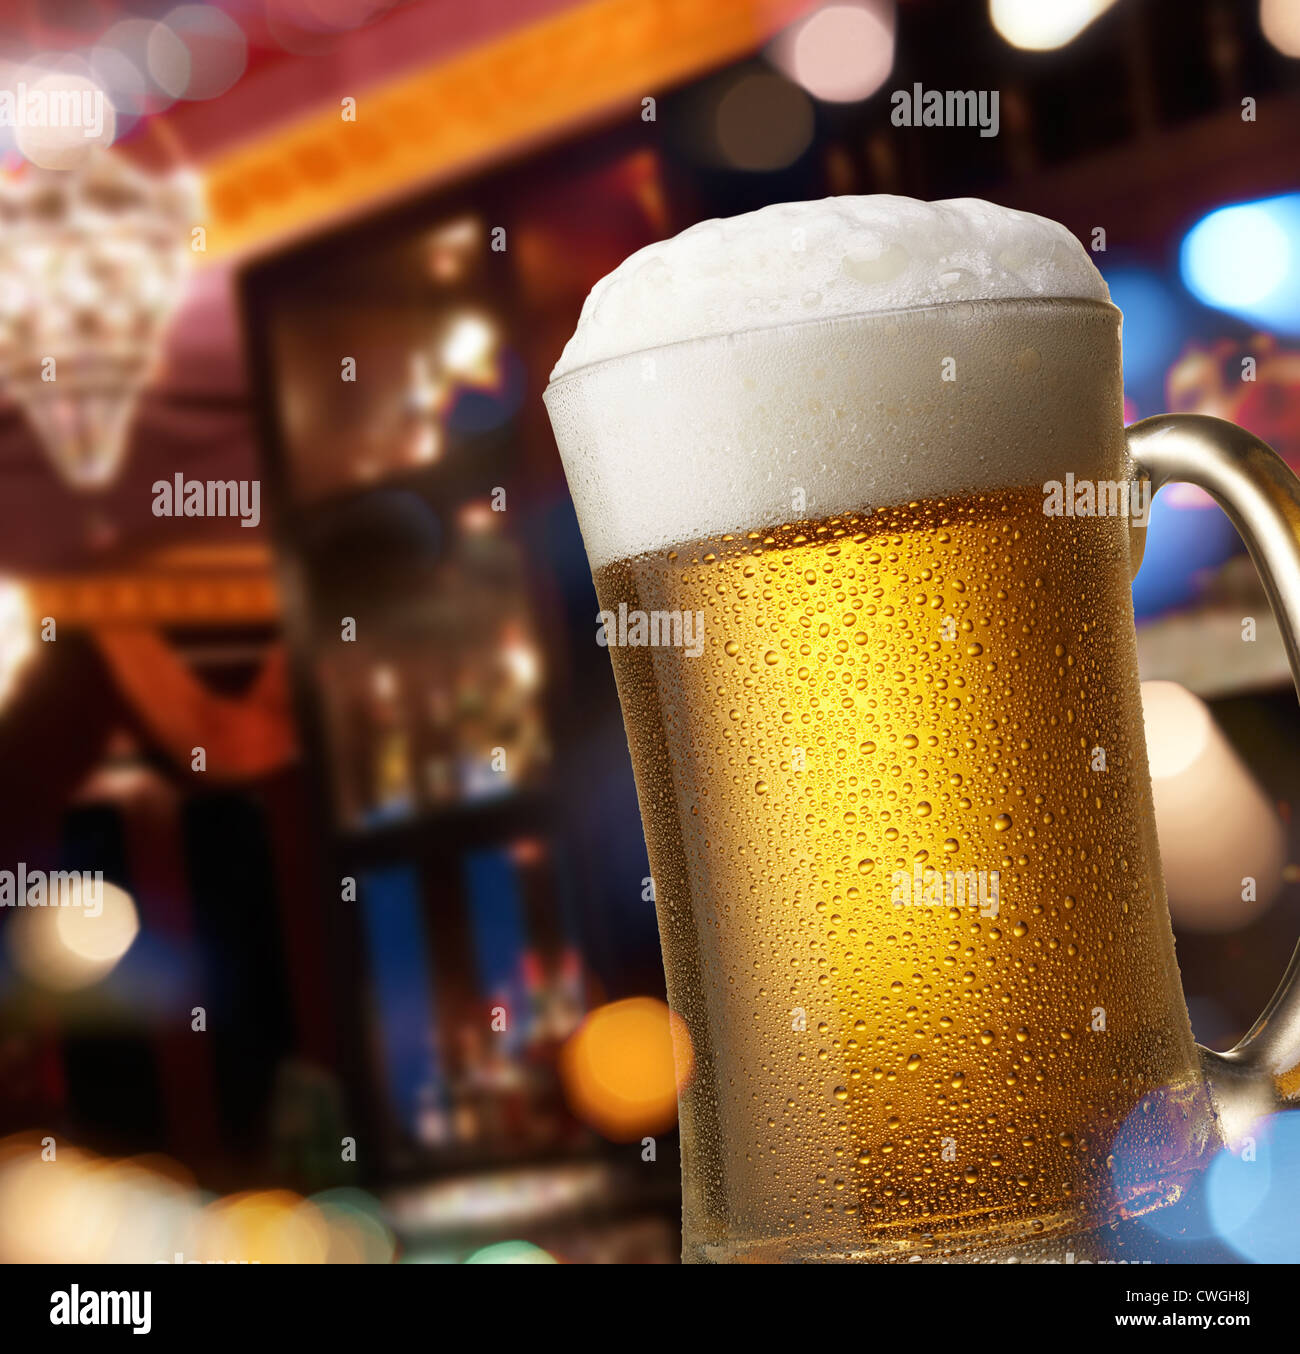 beer on bar counter with pub interior background, view through window with reflection of street lights Stock Photo